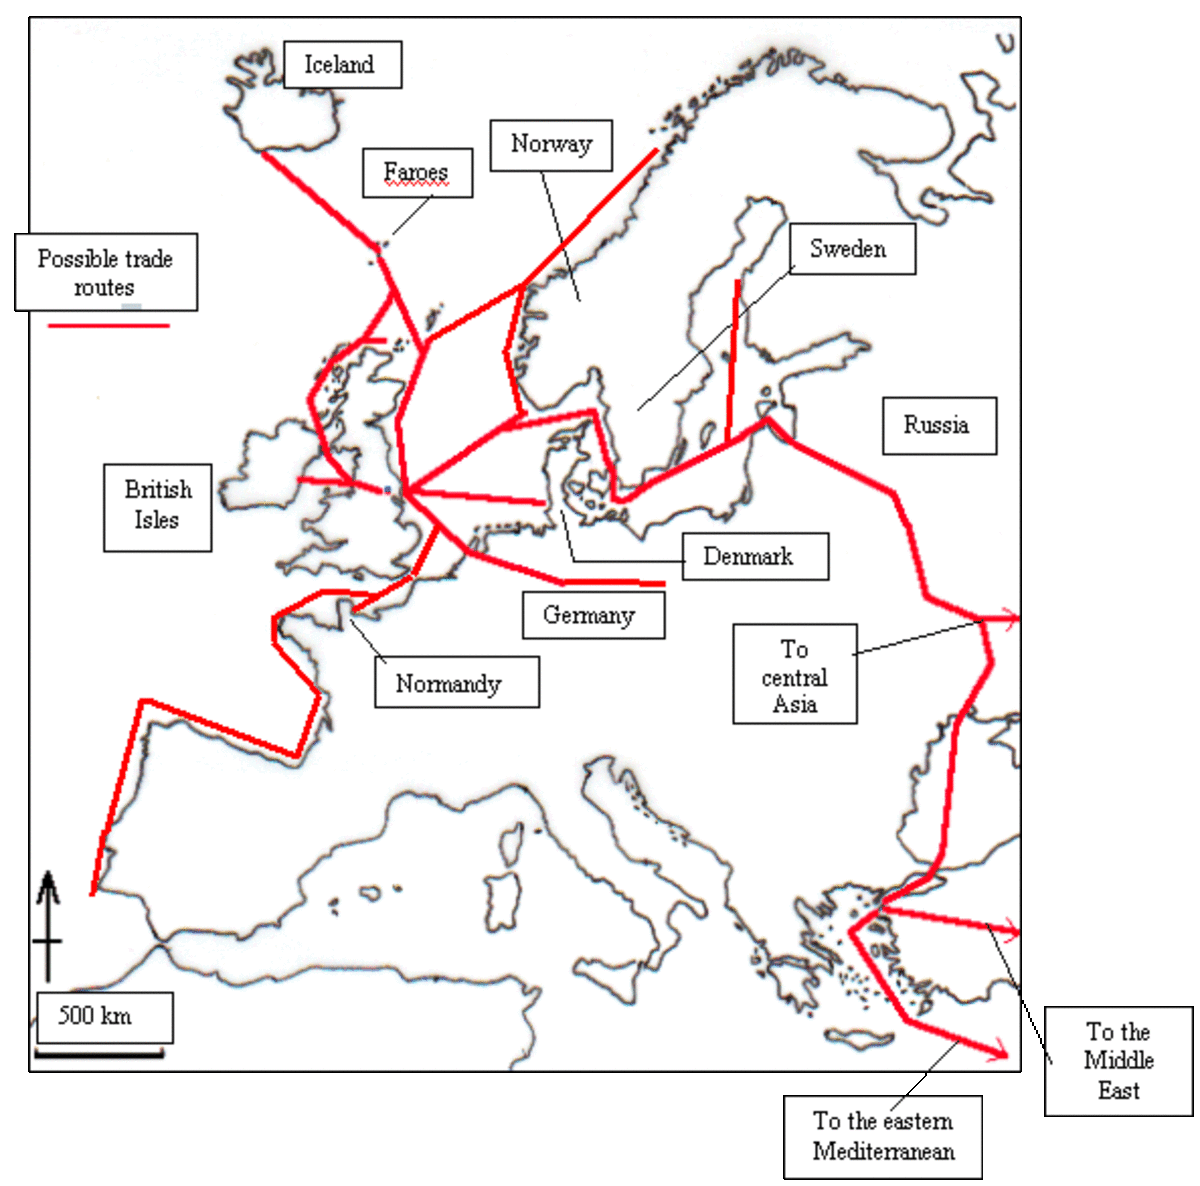 Slave trade routes followed the pattern of other trade routes from as far afield as Limerick and Baghdad (west-east), Kaupang and Constantinople (north-south)